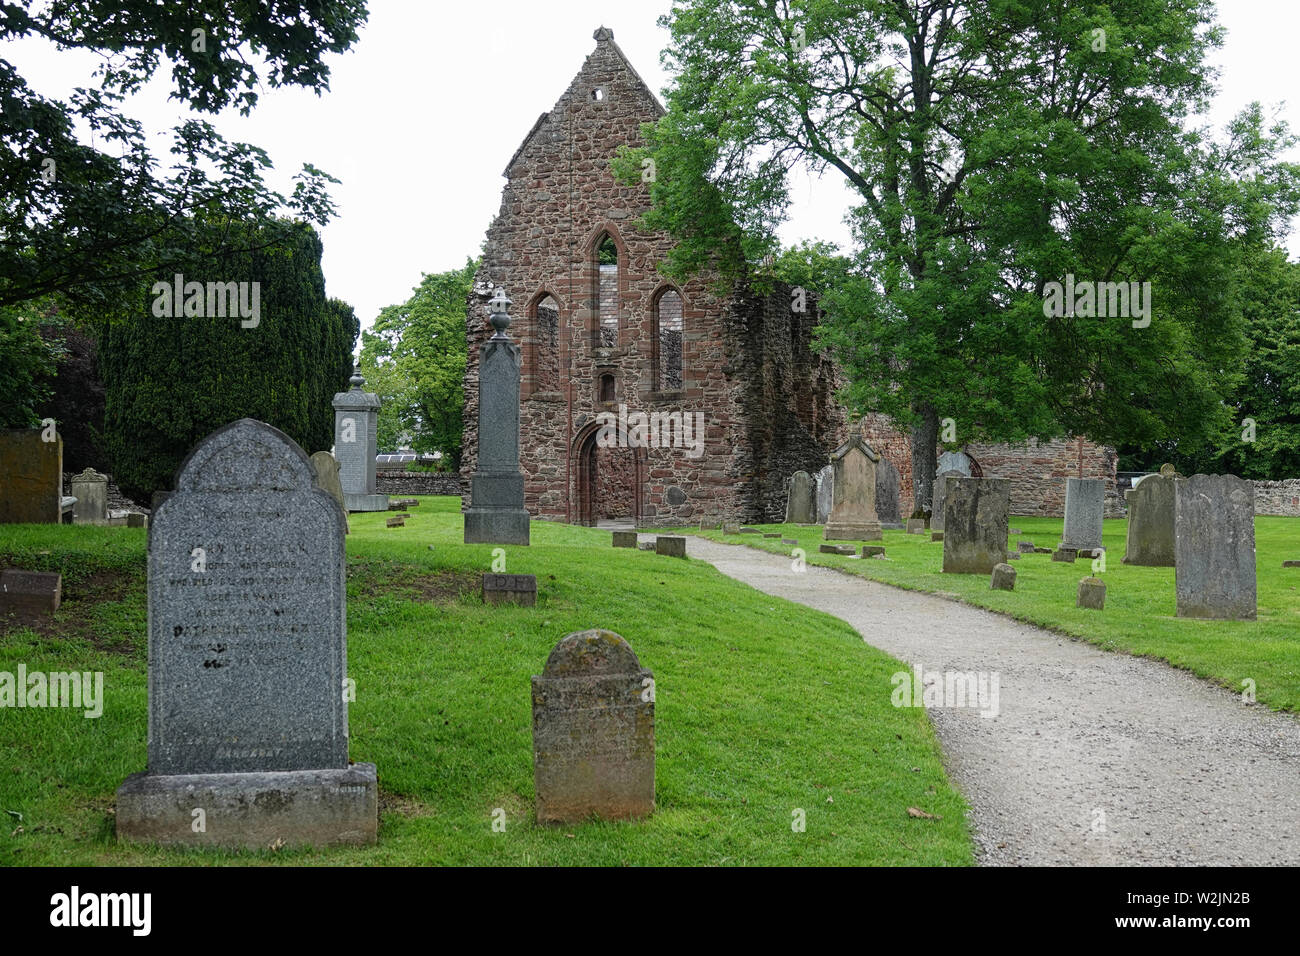 The Beauty Priory cemetery and church ruins - originally built in the 1200s AD in Inverness-shire, Scotland - are shown during an afternoon day. Stock Photo